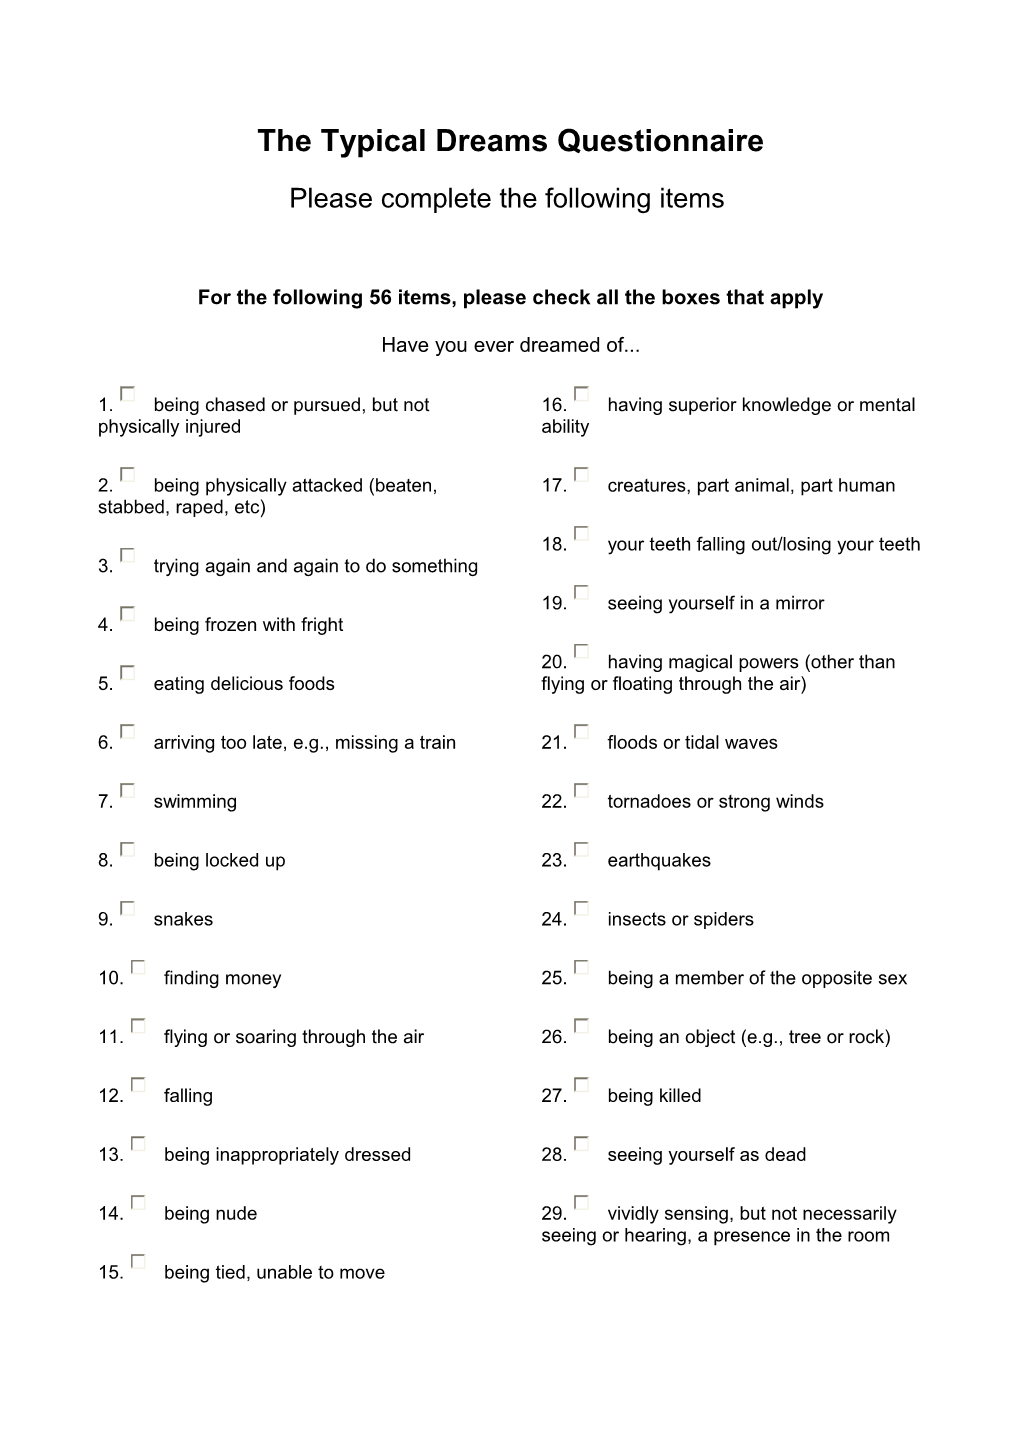 The Typical Dreams Questionnaire